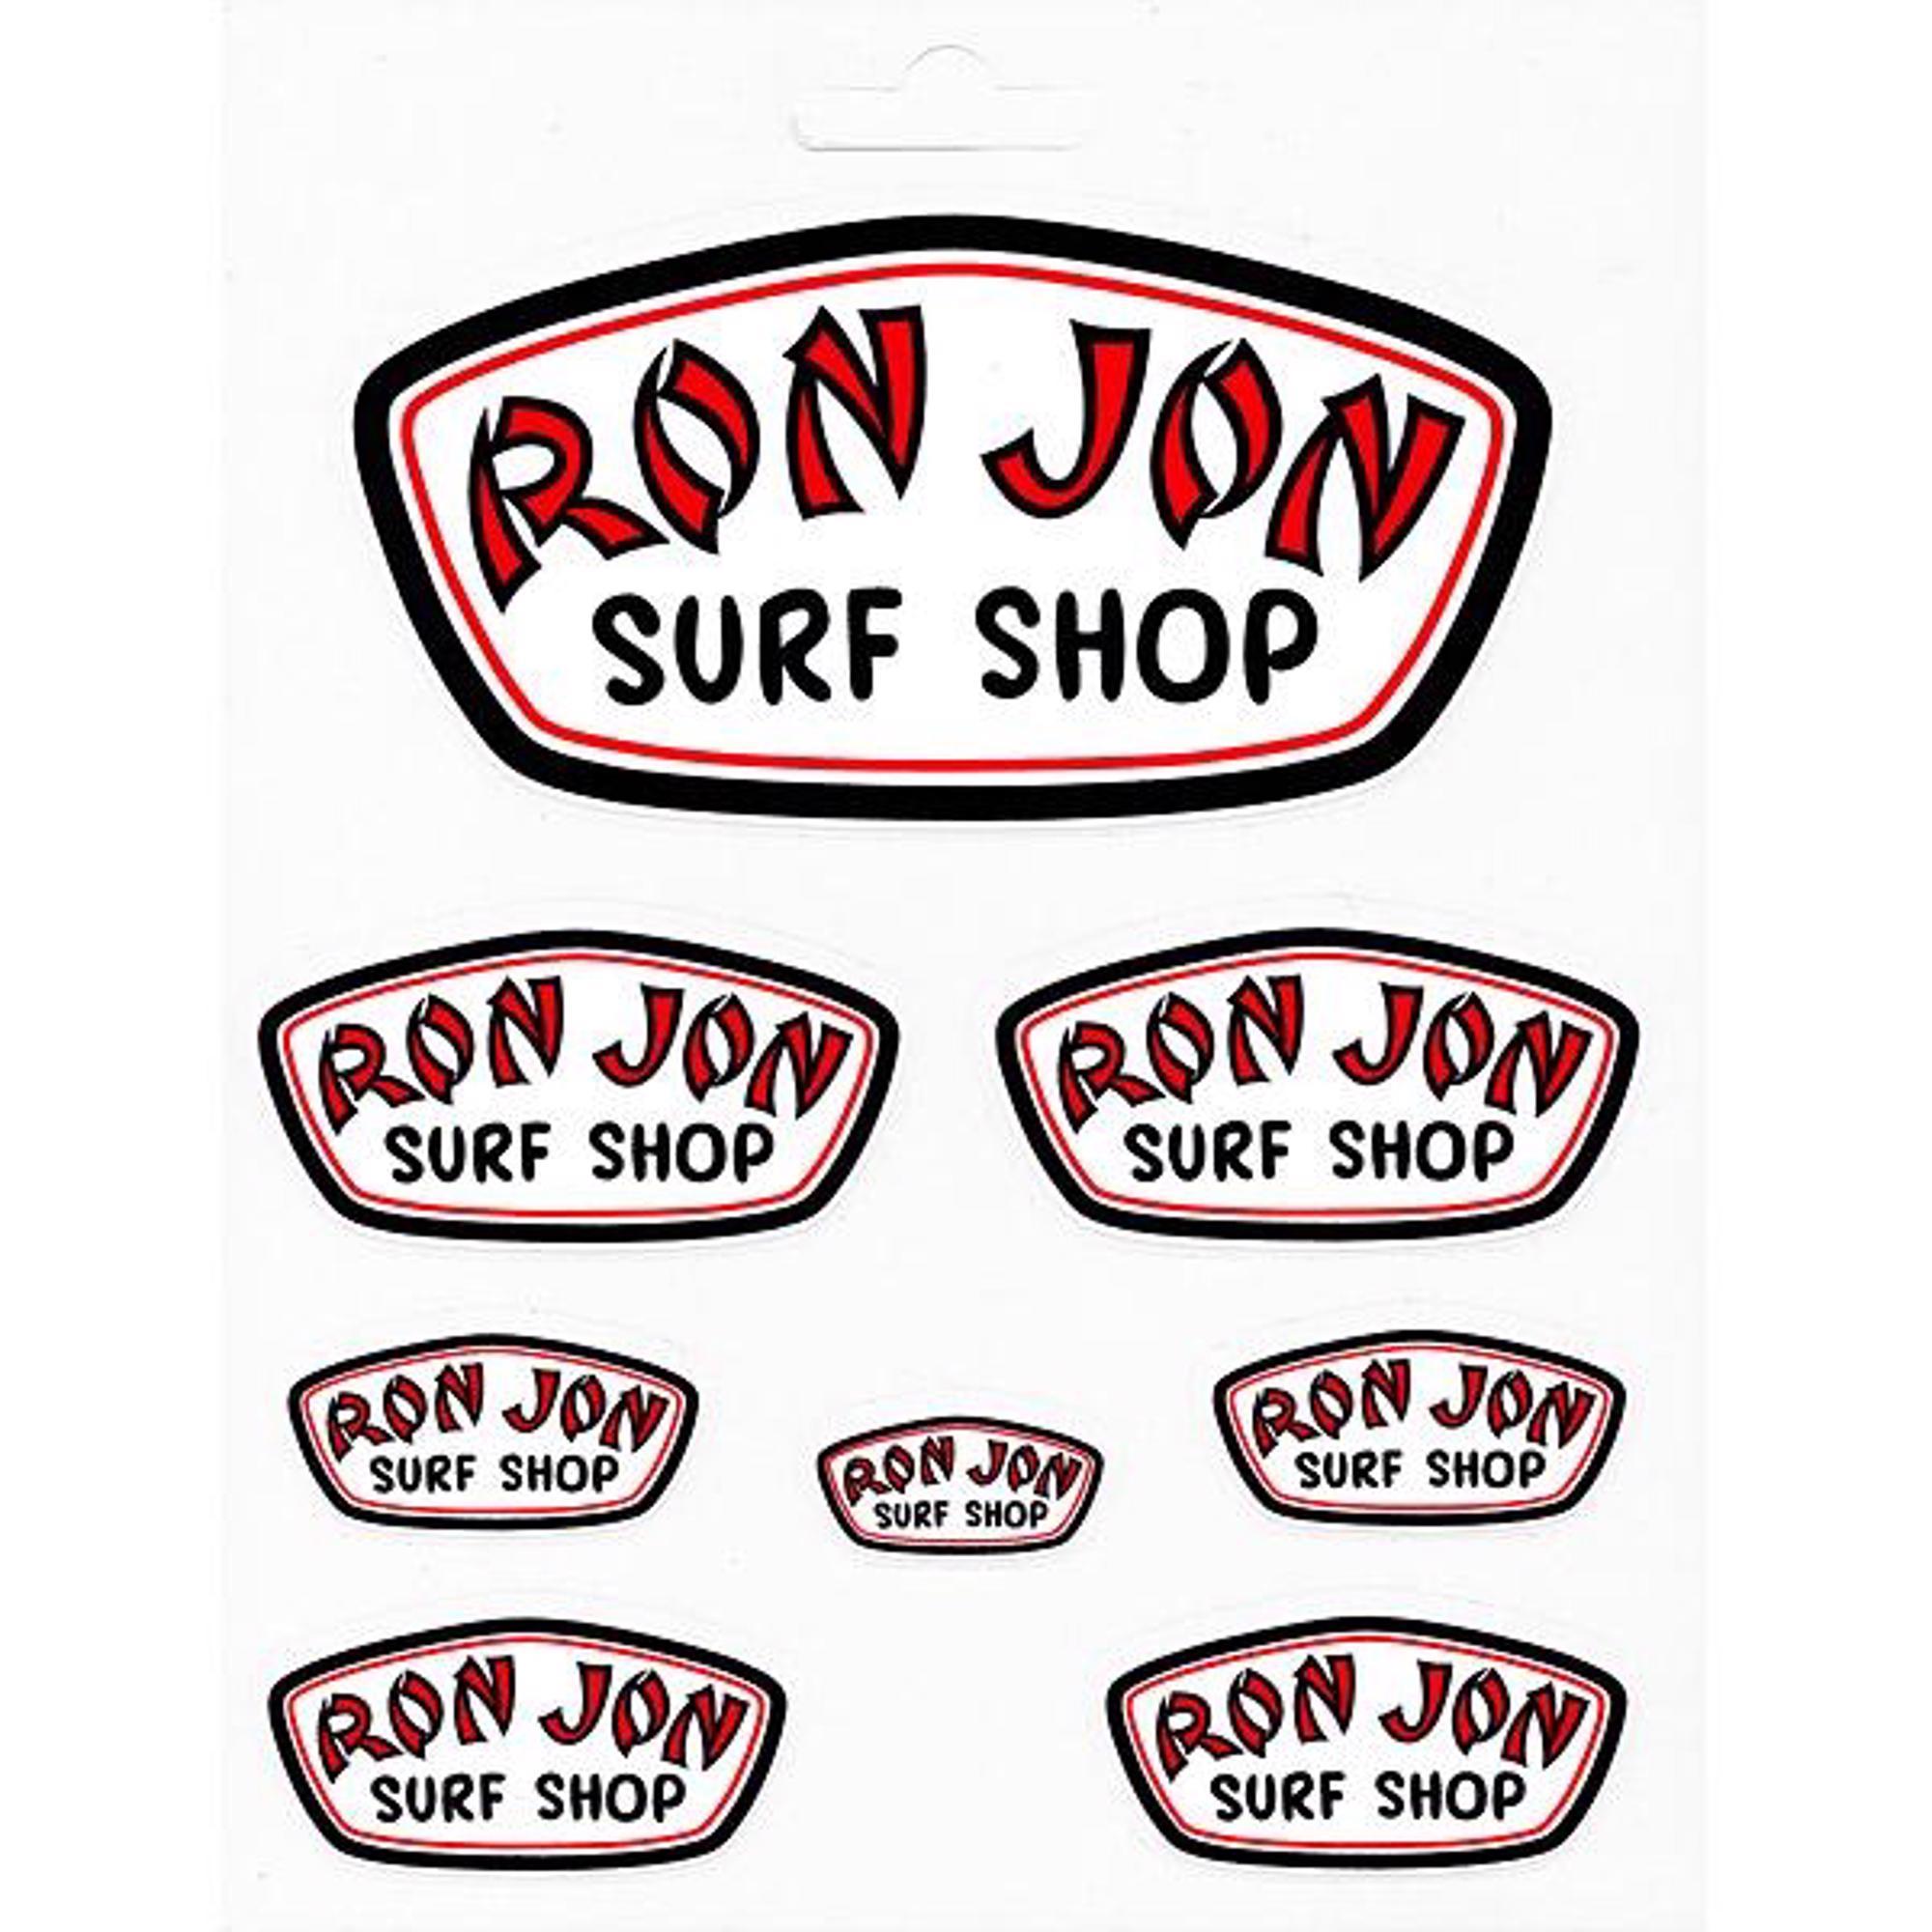 Perfect for Van or board RON JON SURF SHOP STICKER NEW 